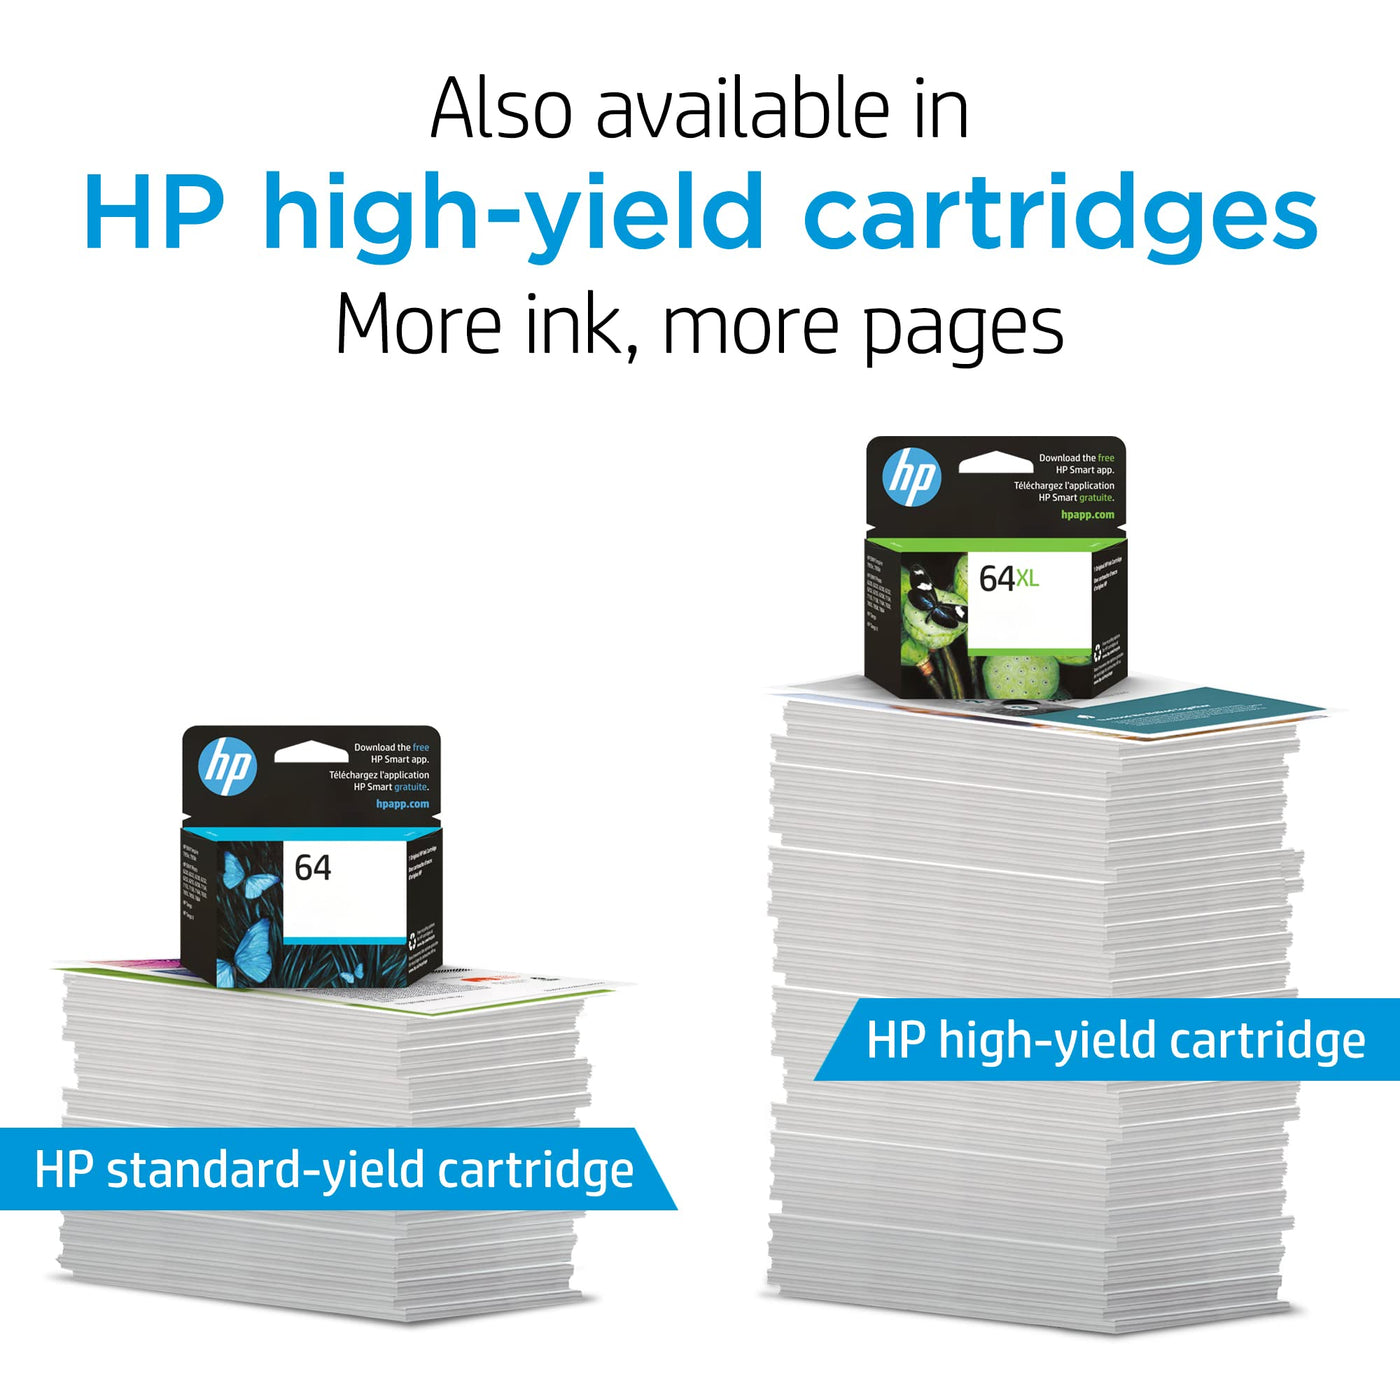 Original HP 64 Black/Tri-color Ink Cartridges (2-pack), Works with HP ENVY  Inspire 7950e; ENVY Photo 6200, 7100, 7800; Tango Series, Eligible for Instant  Ink, X4D92AN